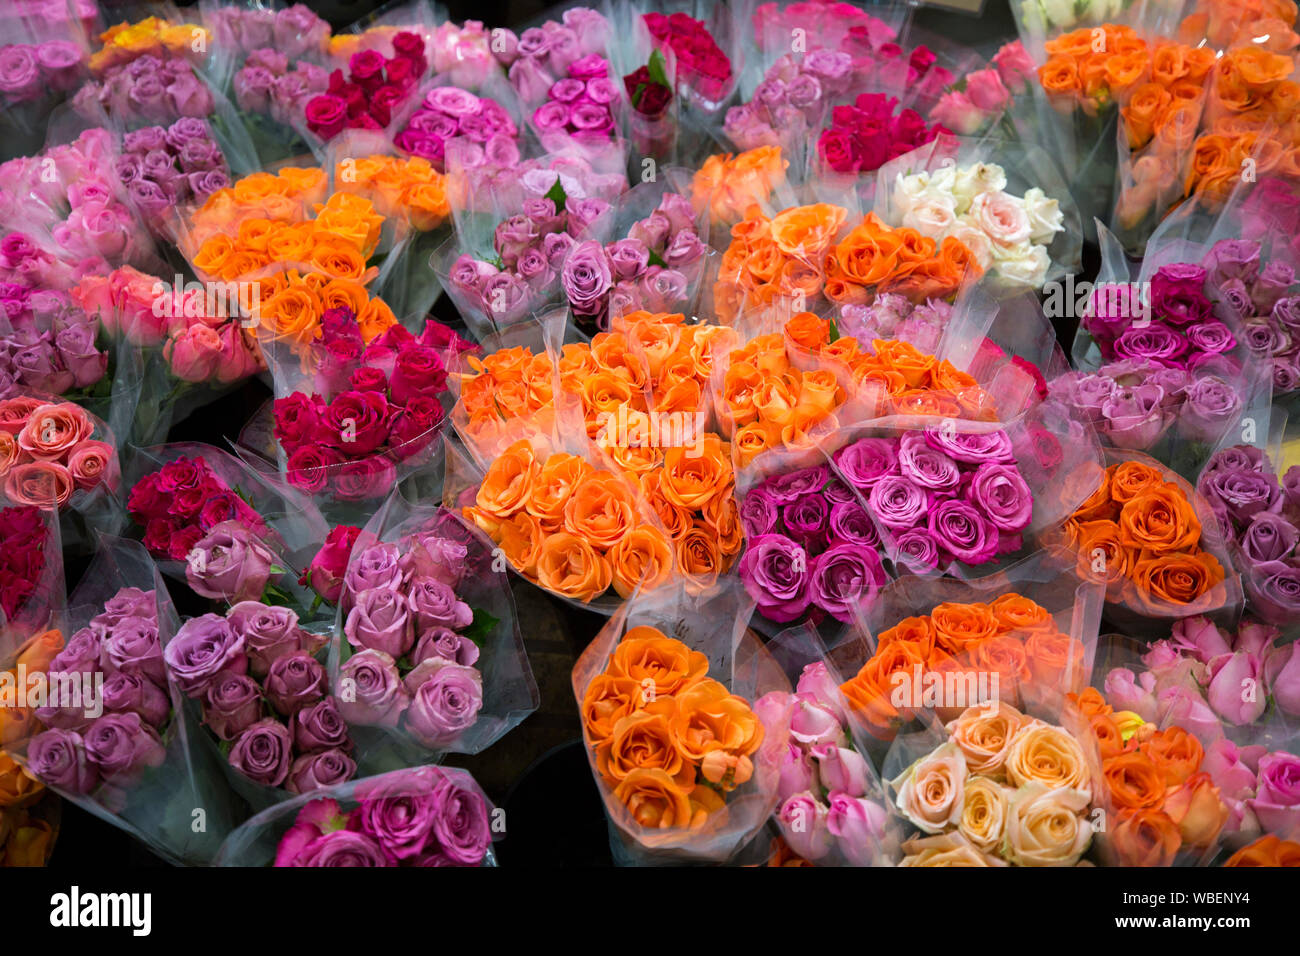 Bunches of roses at florist's market stall - orange, red and mauve flowers wrapped in clear cellophane Stock Photo